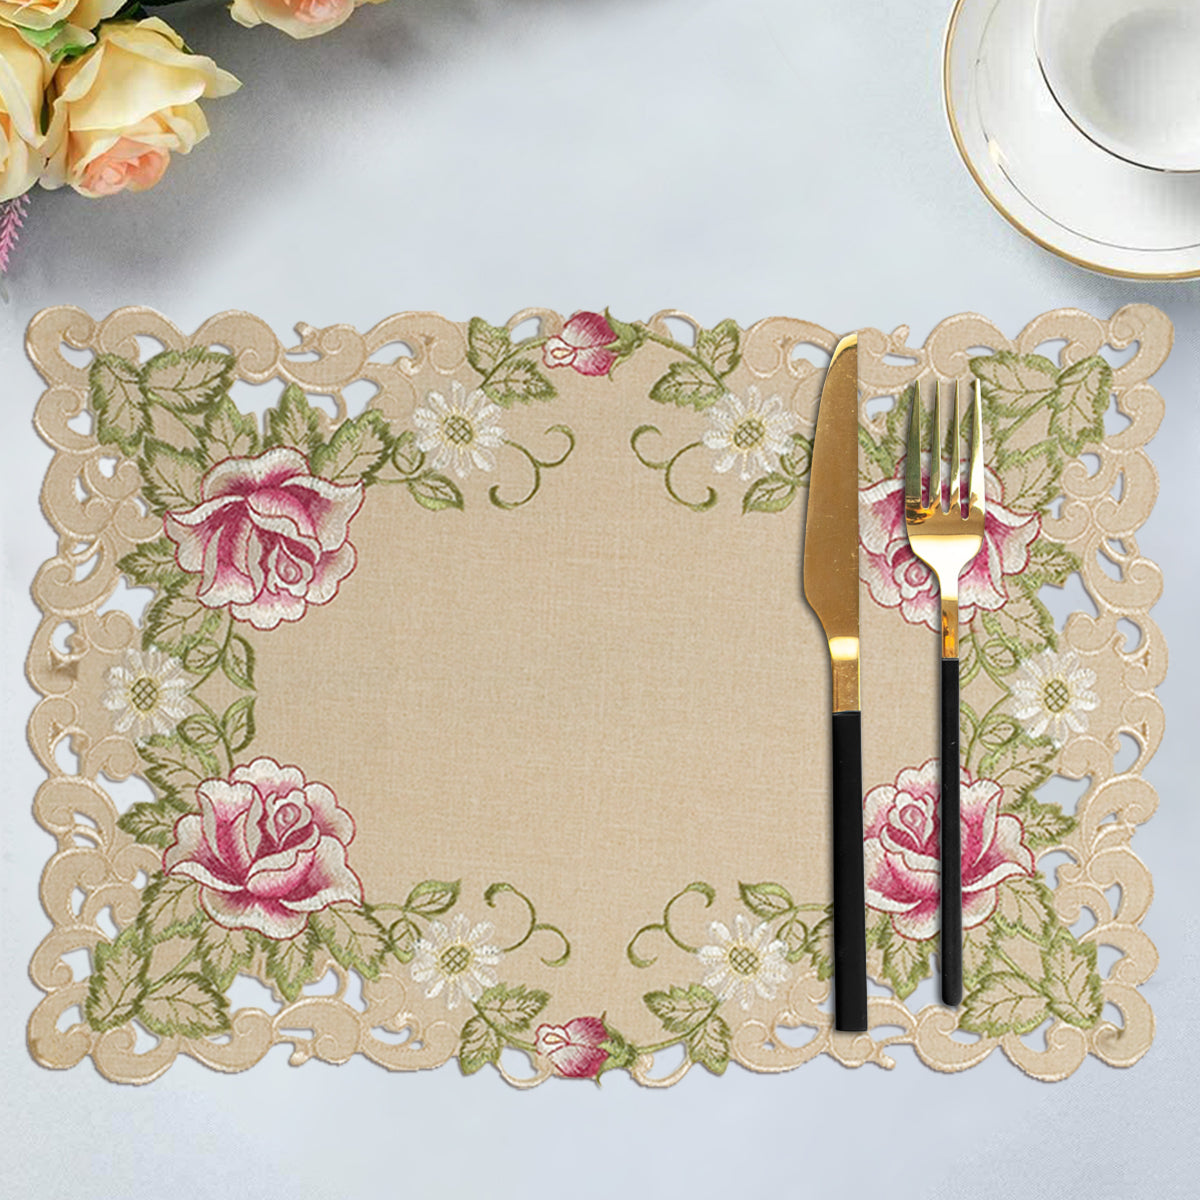 Placemats with European Embroidery - Set of 4